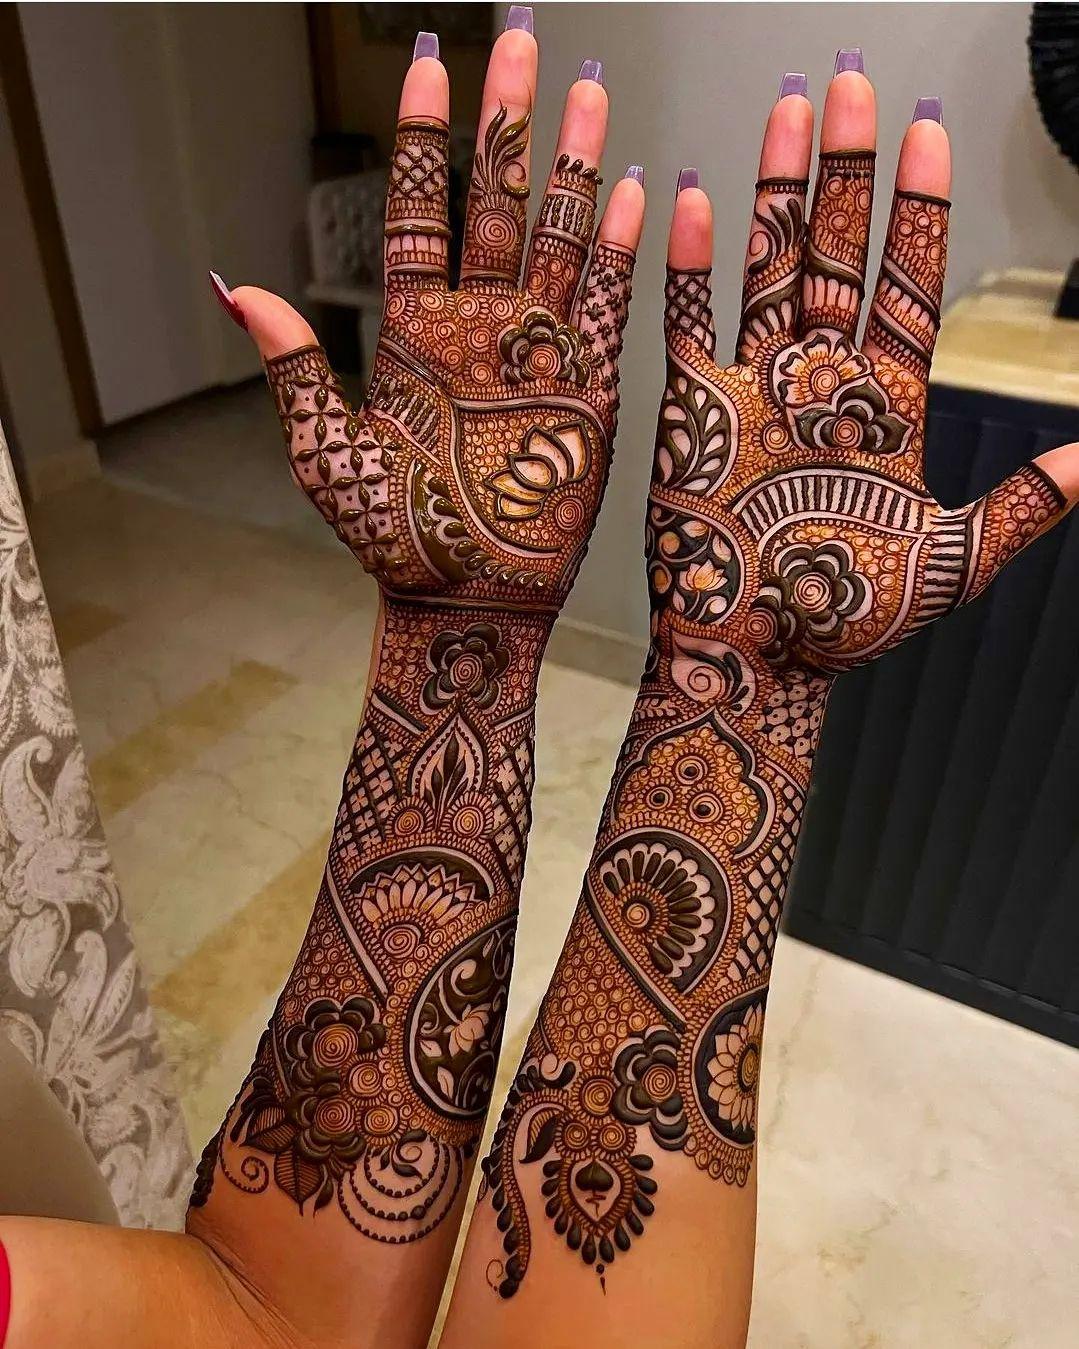 31 Bridal Mehndi Designs For Full Hands You Just Cannot Miss